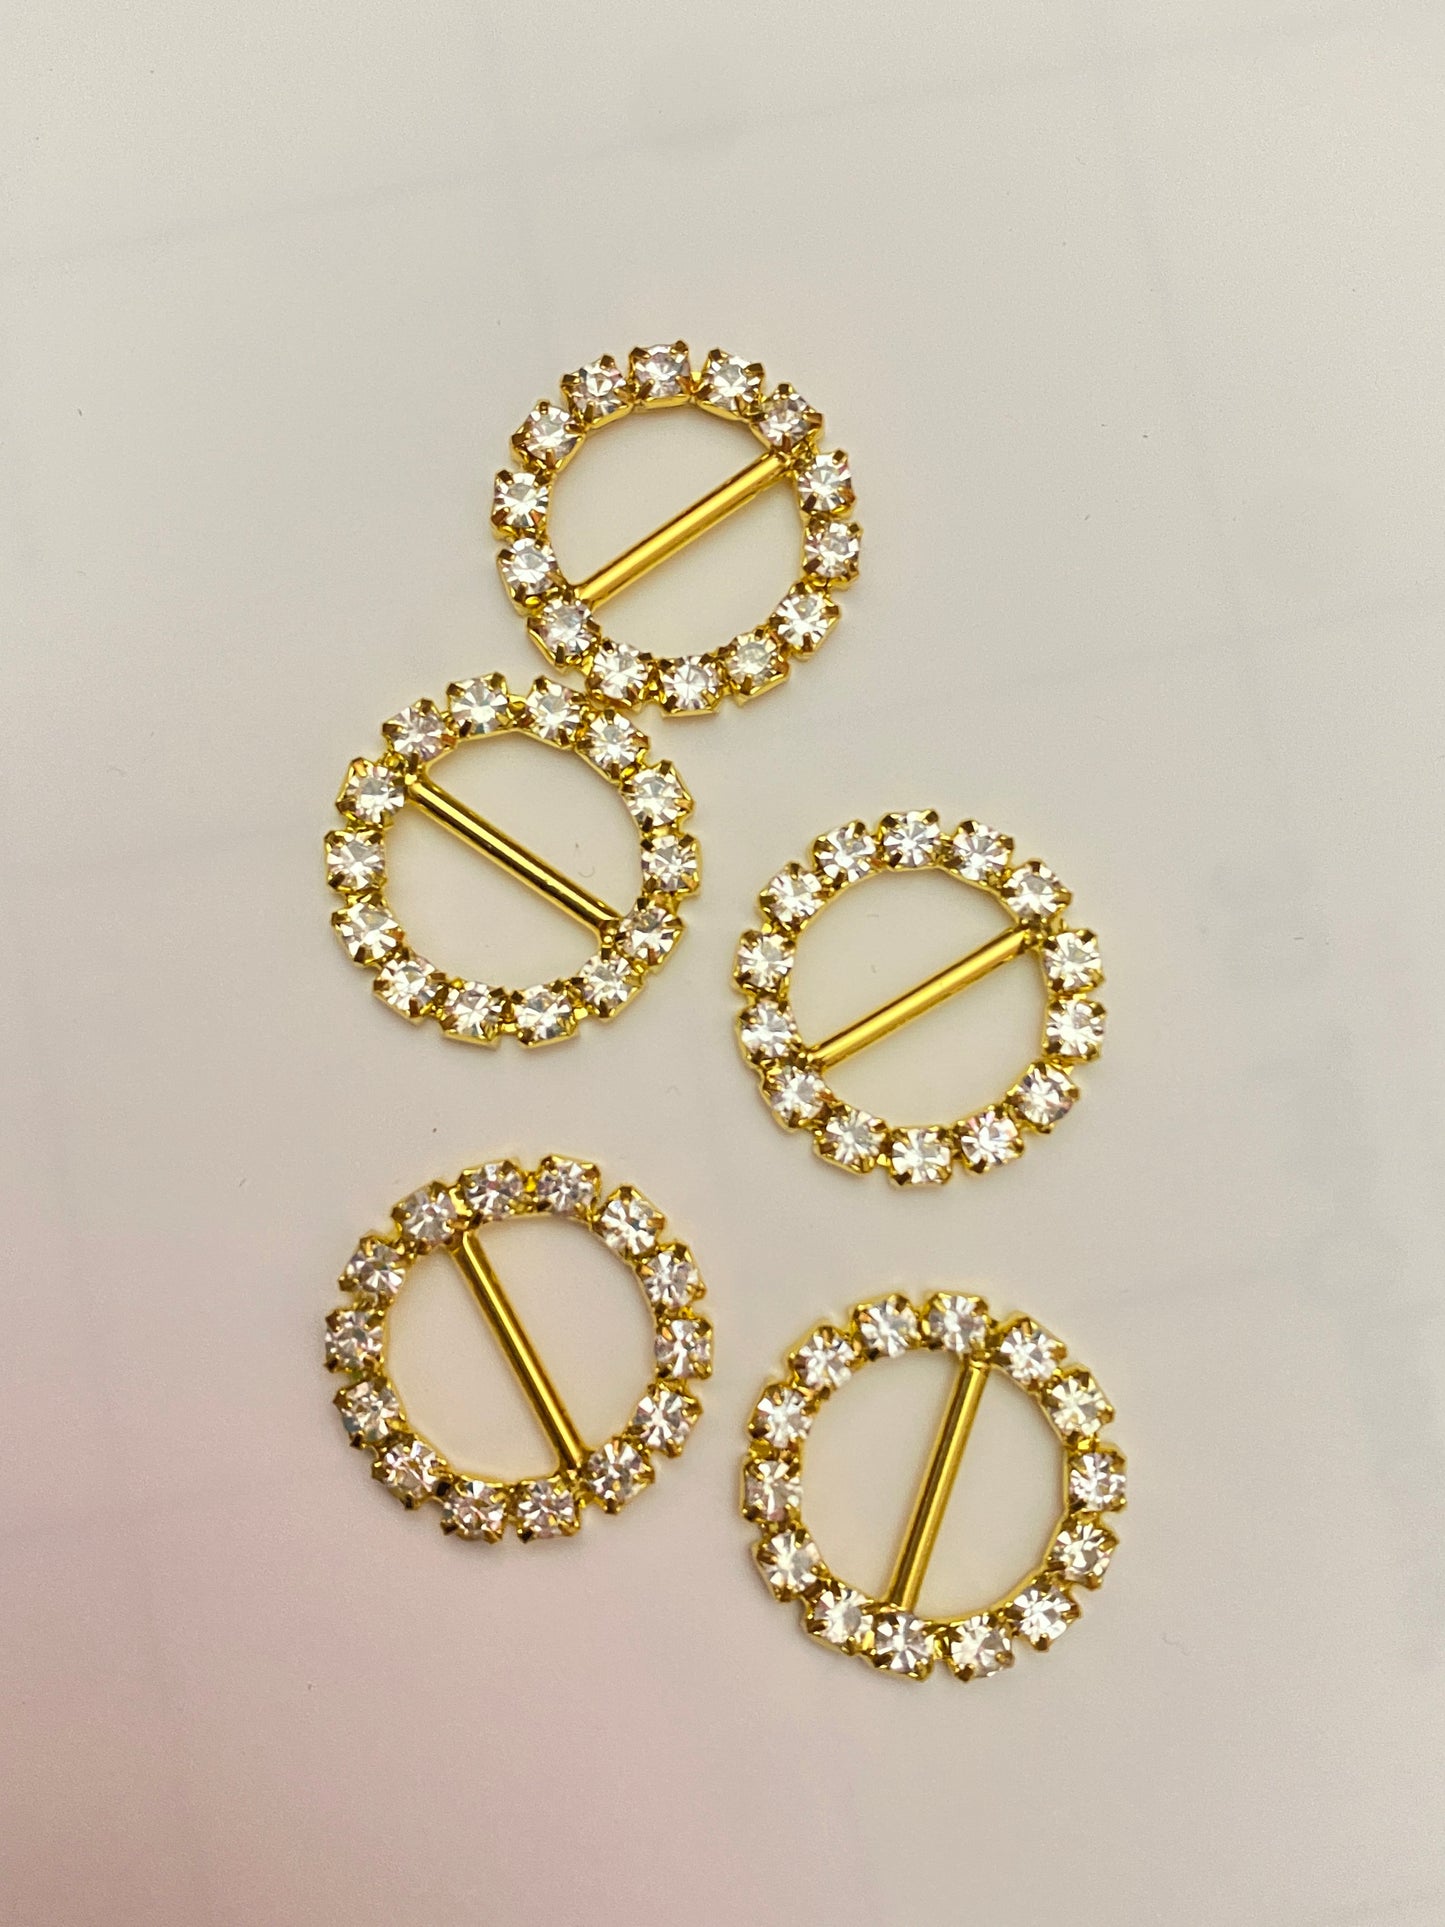 Gold Round Embellishments 5 Pieces